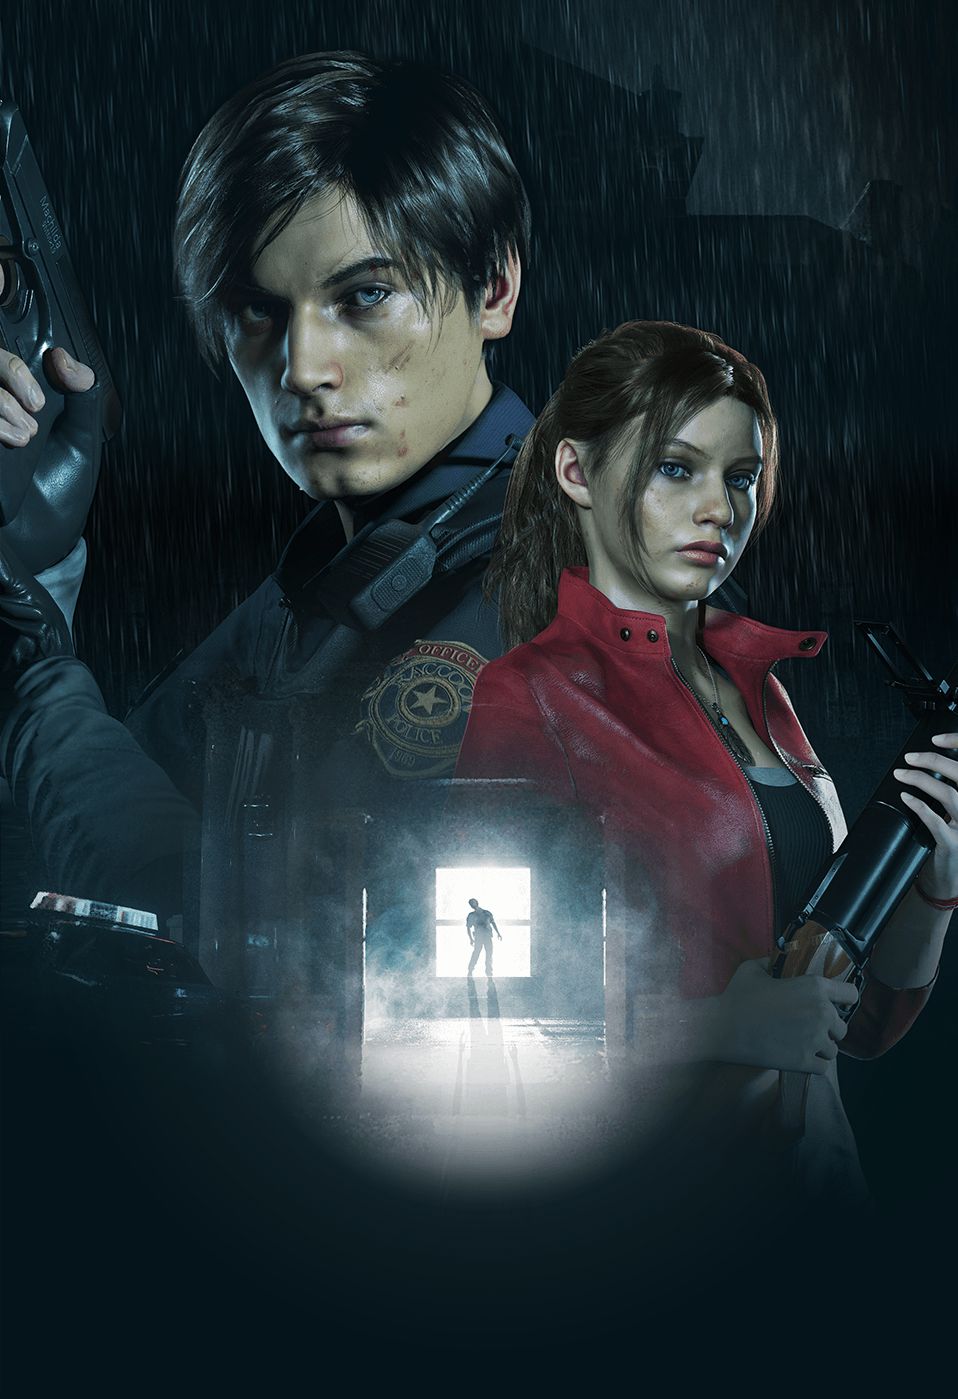 Forum Image: https://vignette.wikia.nocookie.net/residentevil/images/b/b8/RE2make_Leon_and_Claire.jpg/revision/latest?cb=20180612032159